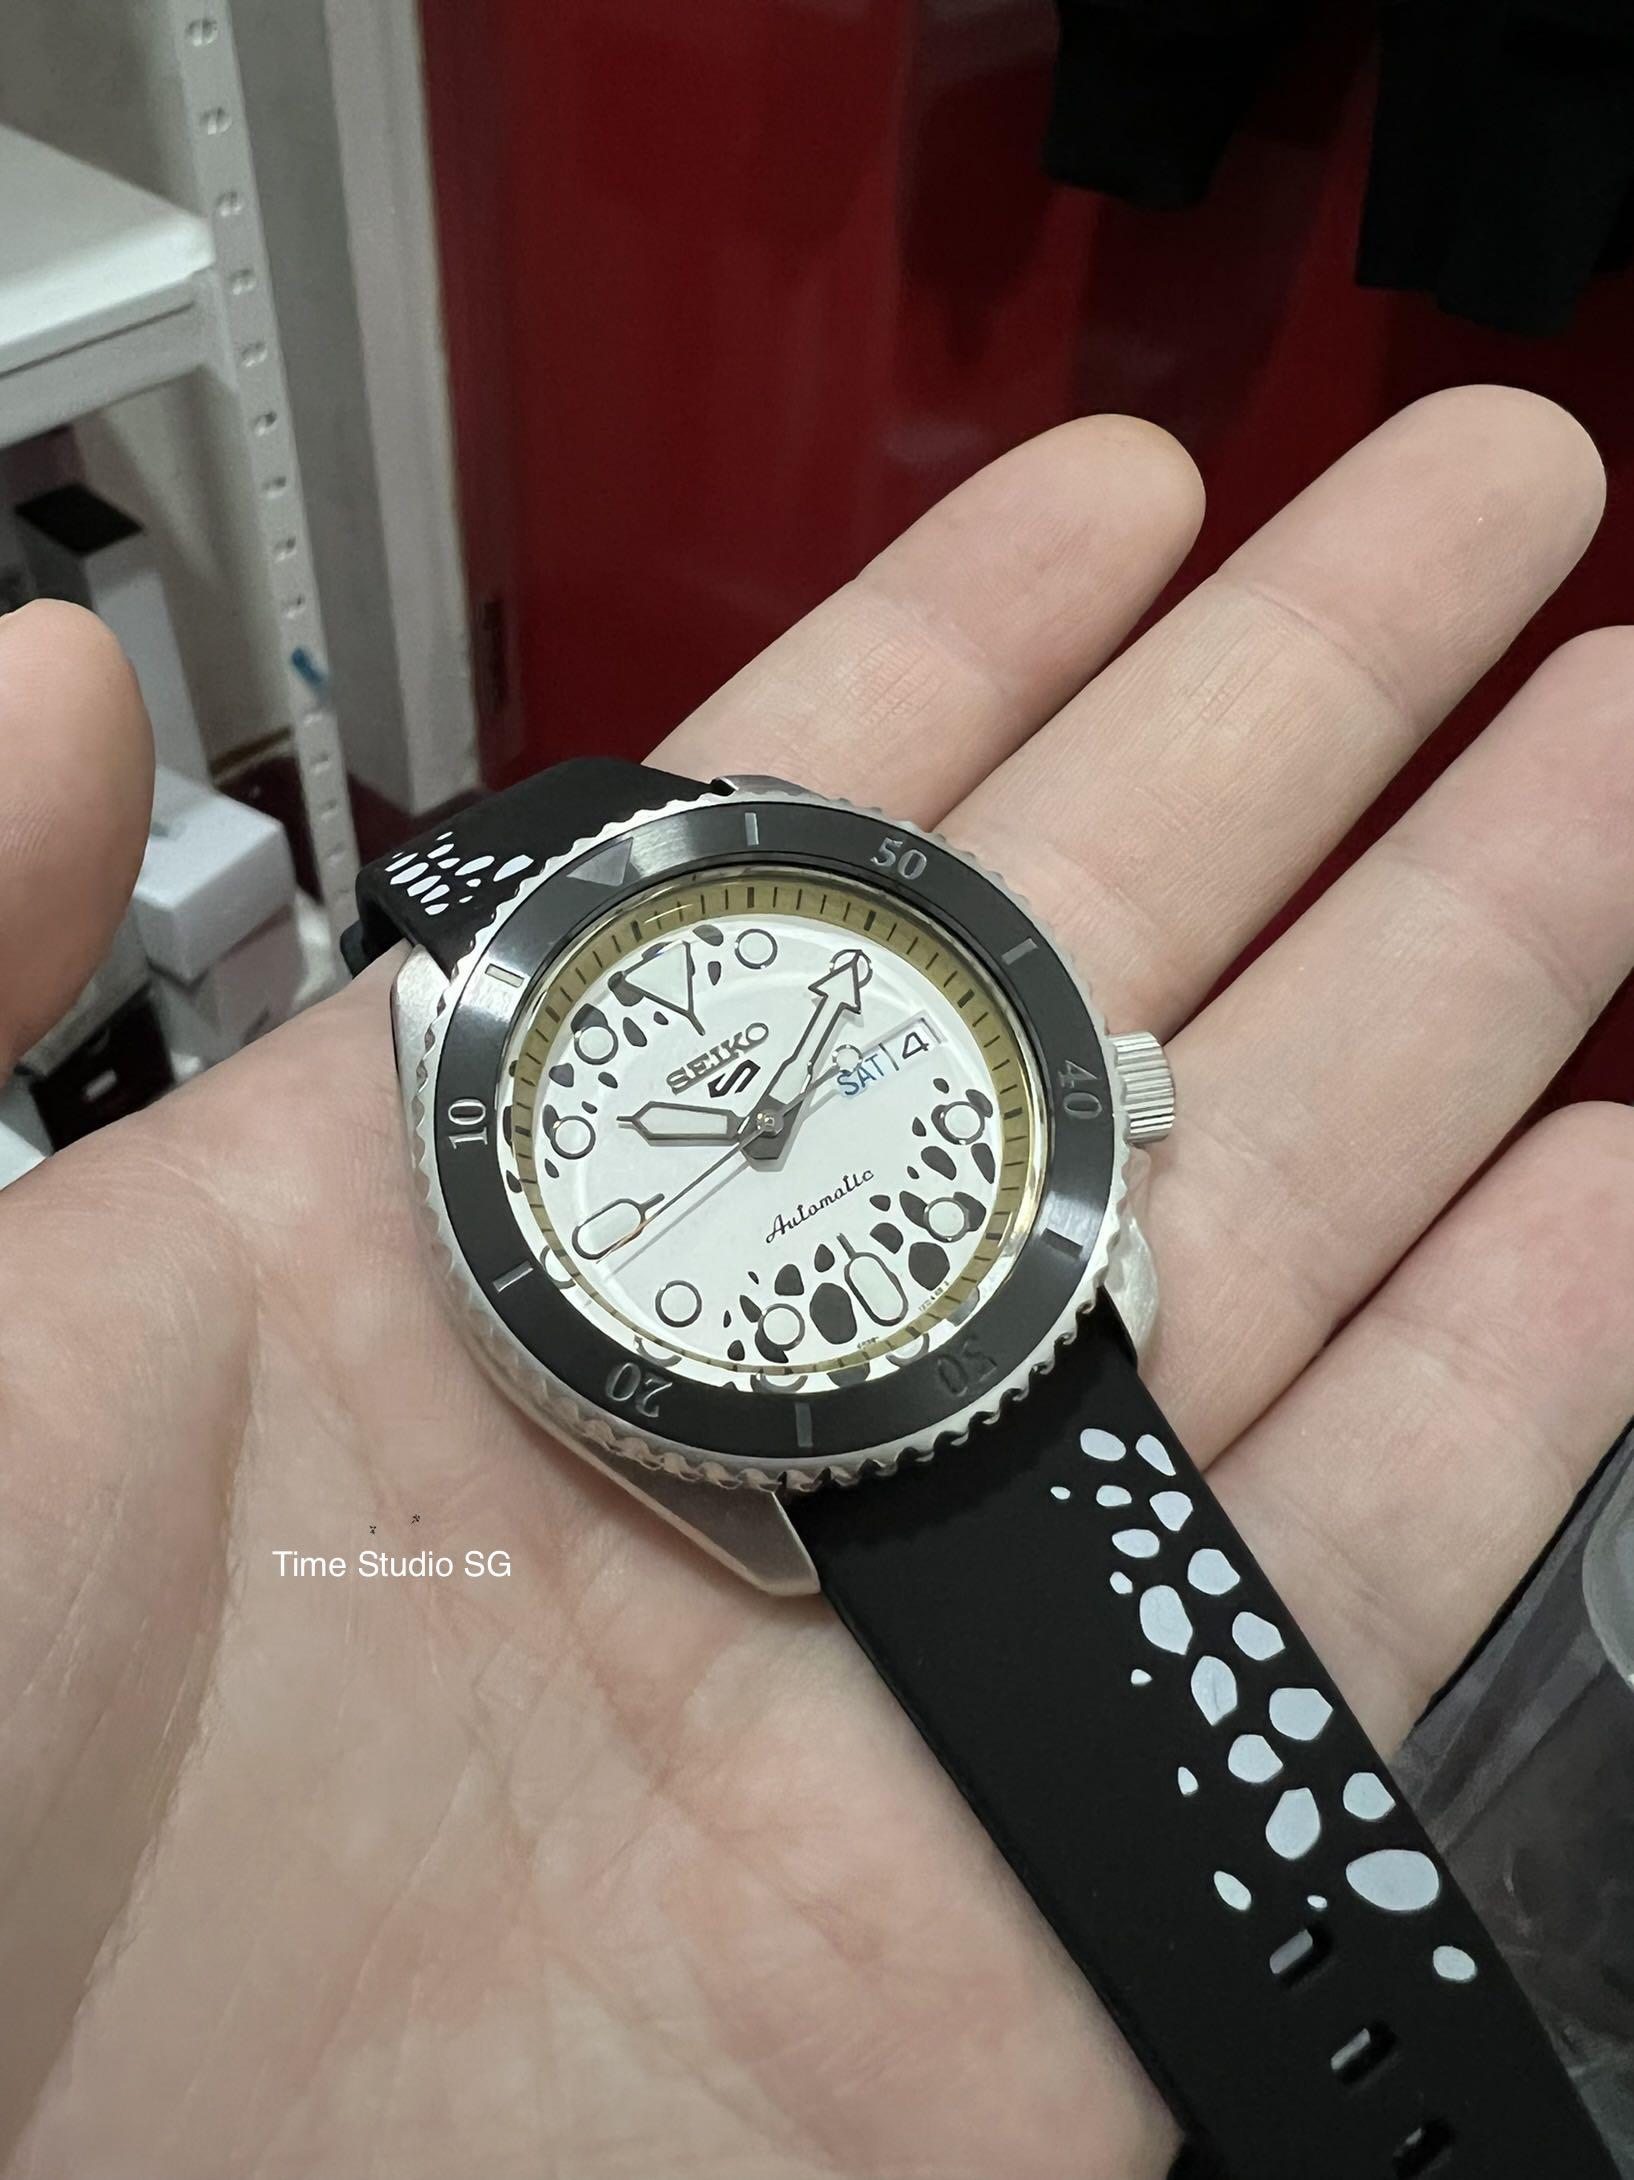 ? PM FOR BETTER PRICE ? Seiko One Piece Trafalgar D Water Law Limited  SRPH63K1 SRPH63 srph63k1 srph63, Men's Fashion, Watches & Accessories,  Watches on Carousell